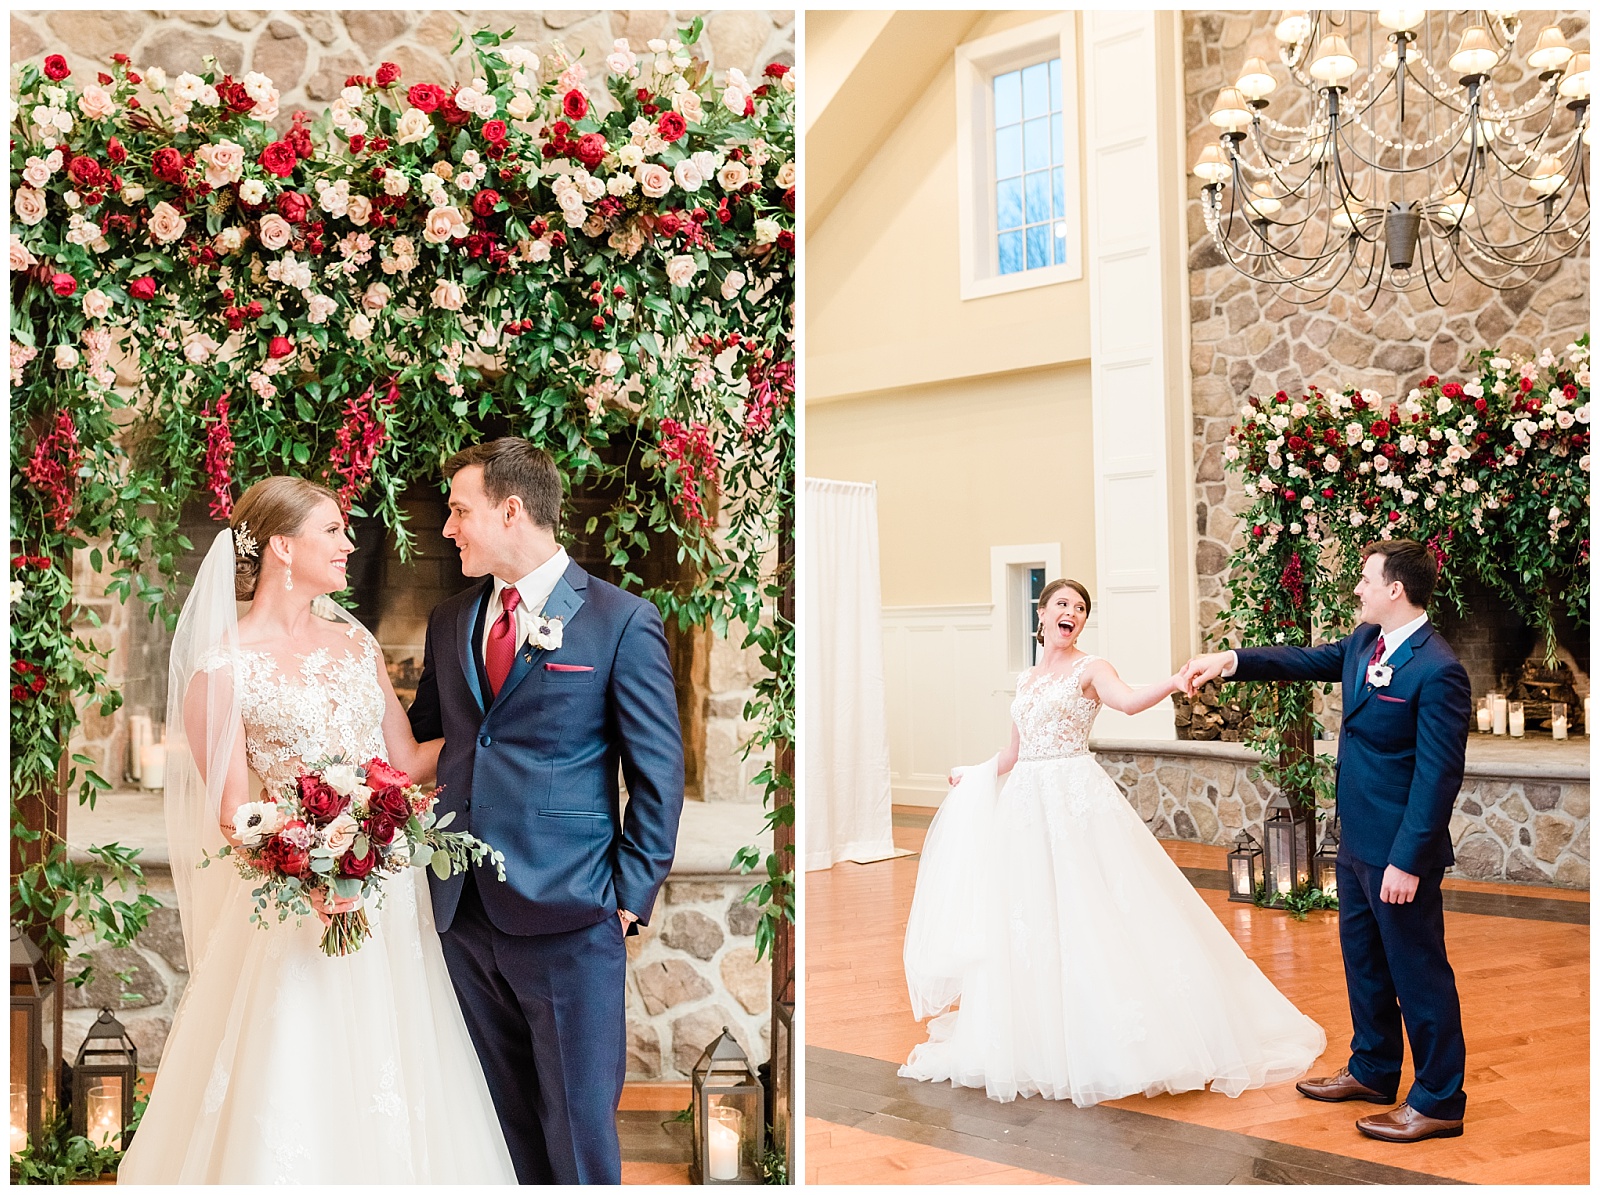 Bride & Groom Portraits,Floral,NJ,New Jersey,The Ryland Inn,Twisted Willow,Wedding,Wedding Photographer,Winter,